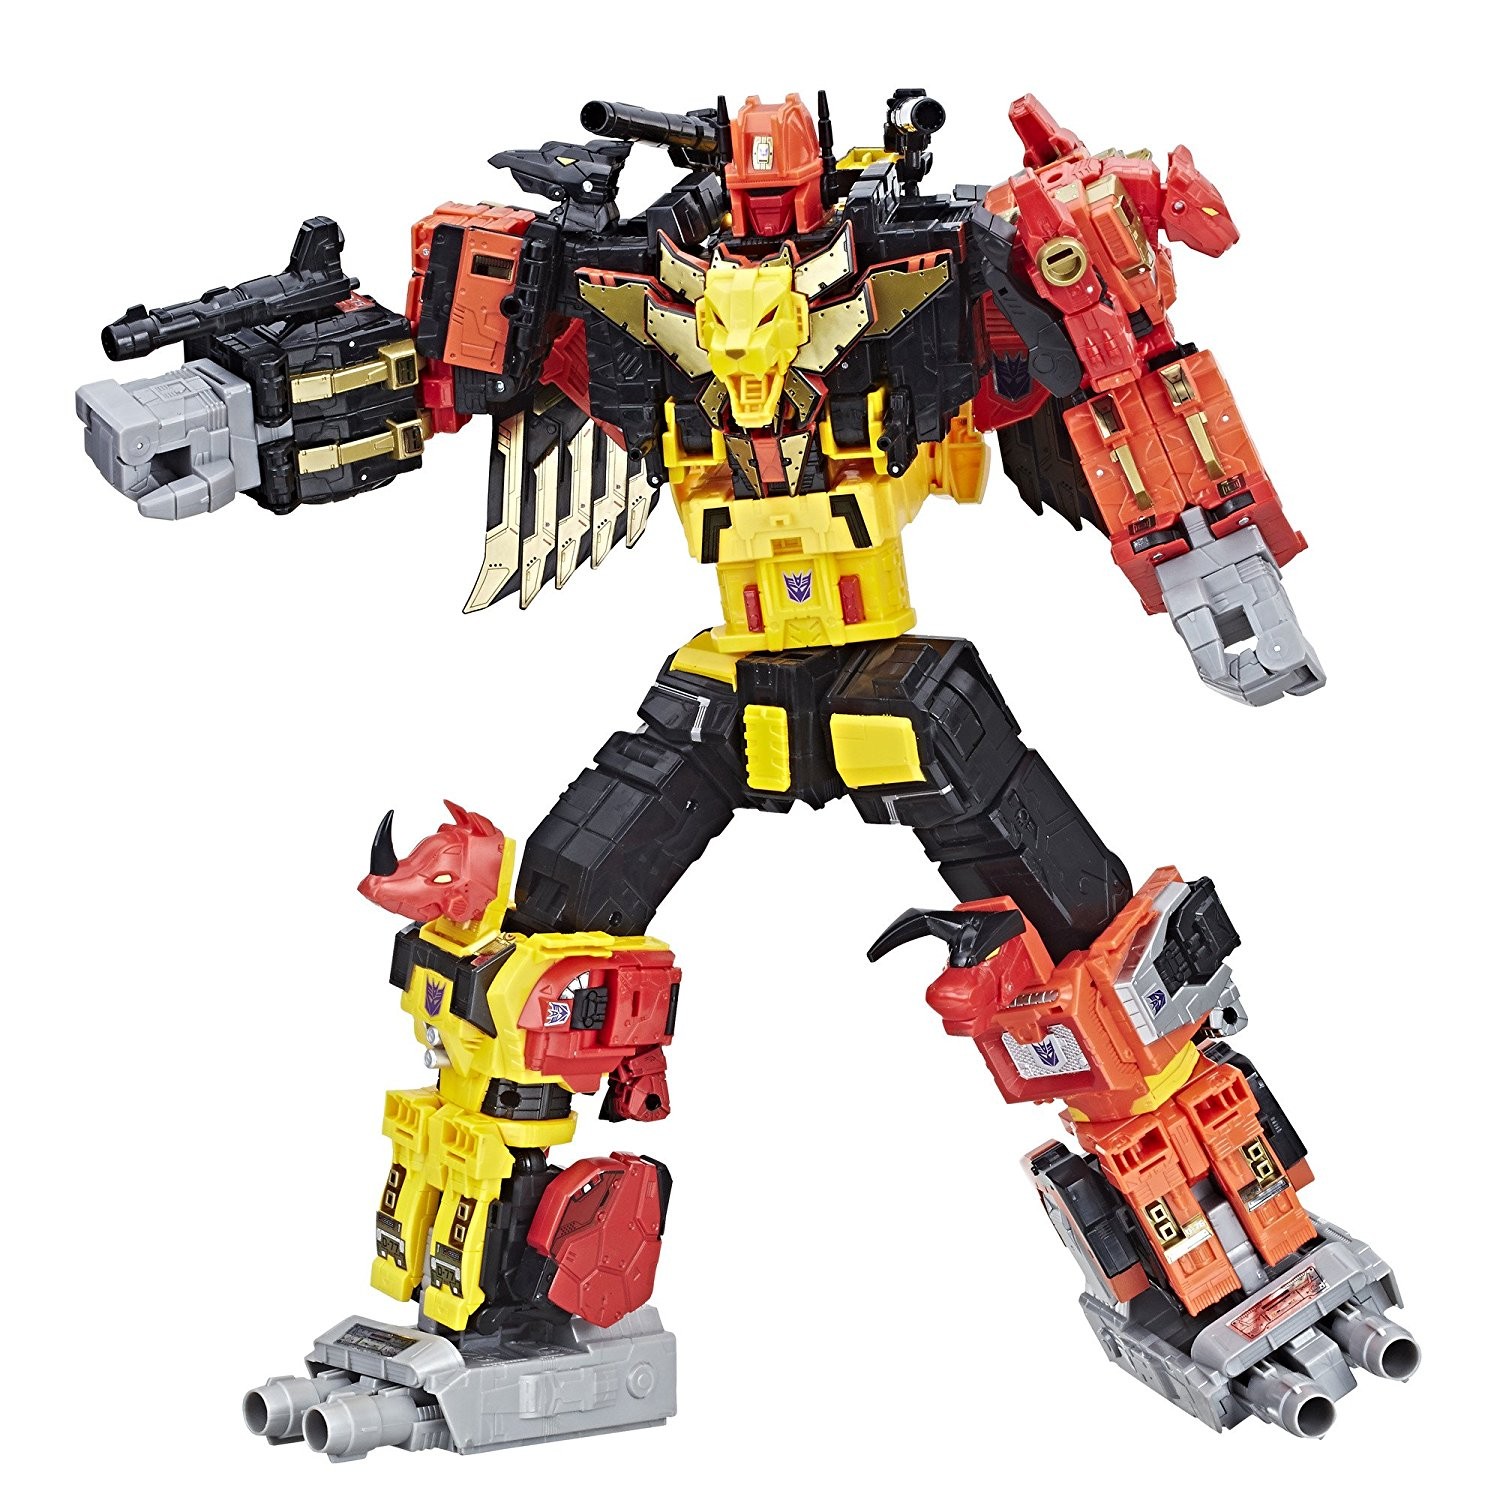 Transformers News: All 4 Amazon.com Prime Wars Trilogy Exclusives Currently Available as well as Titan Class PREDAKING